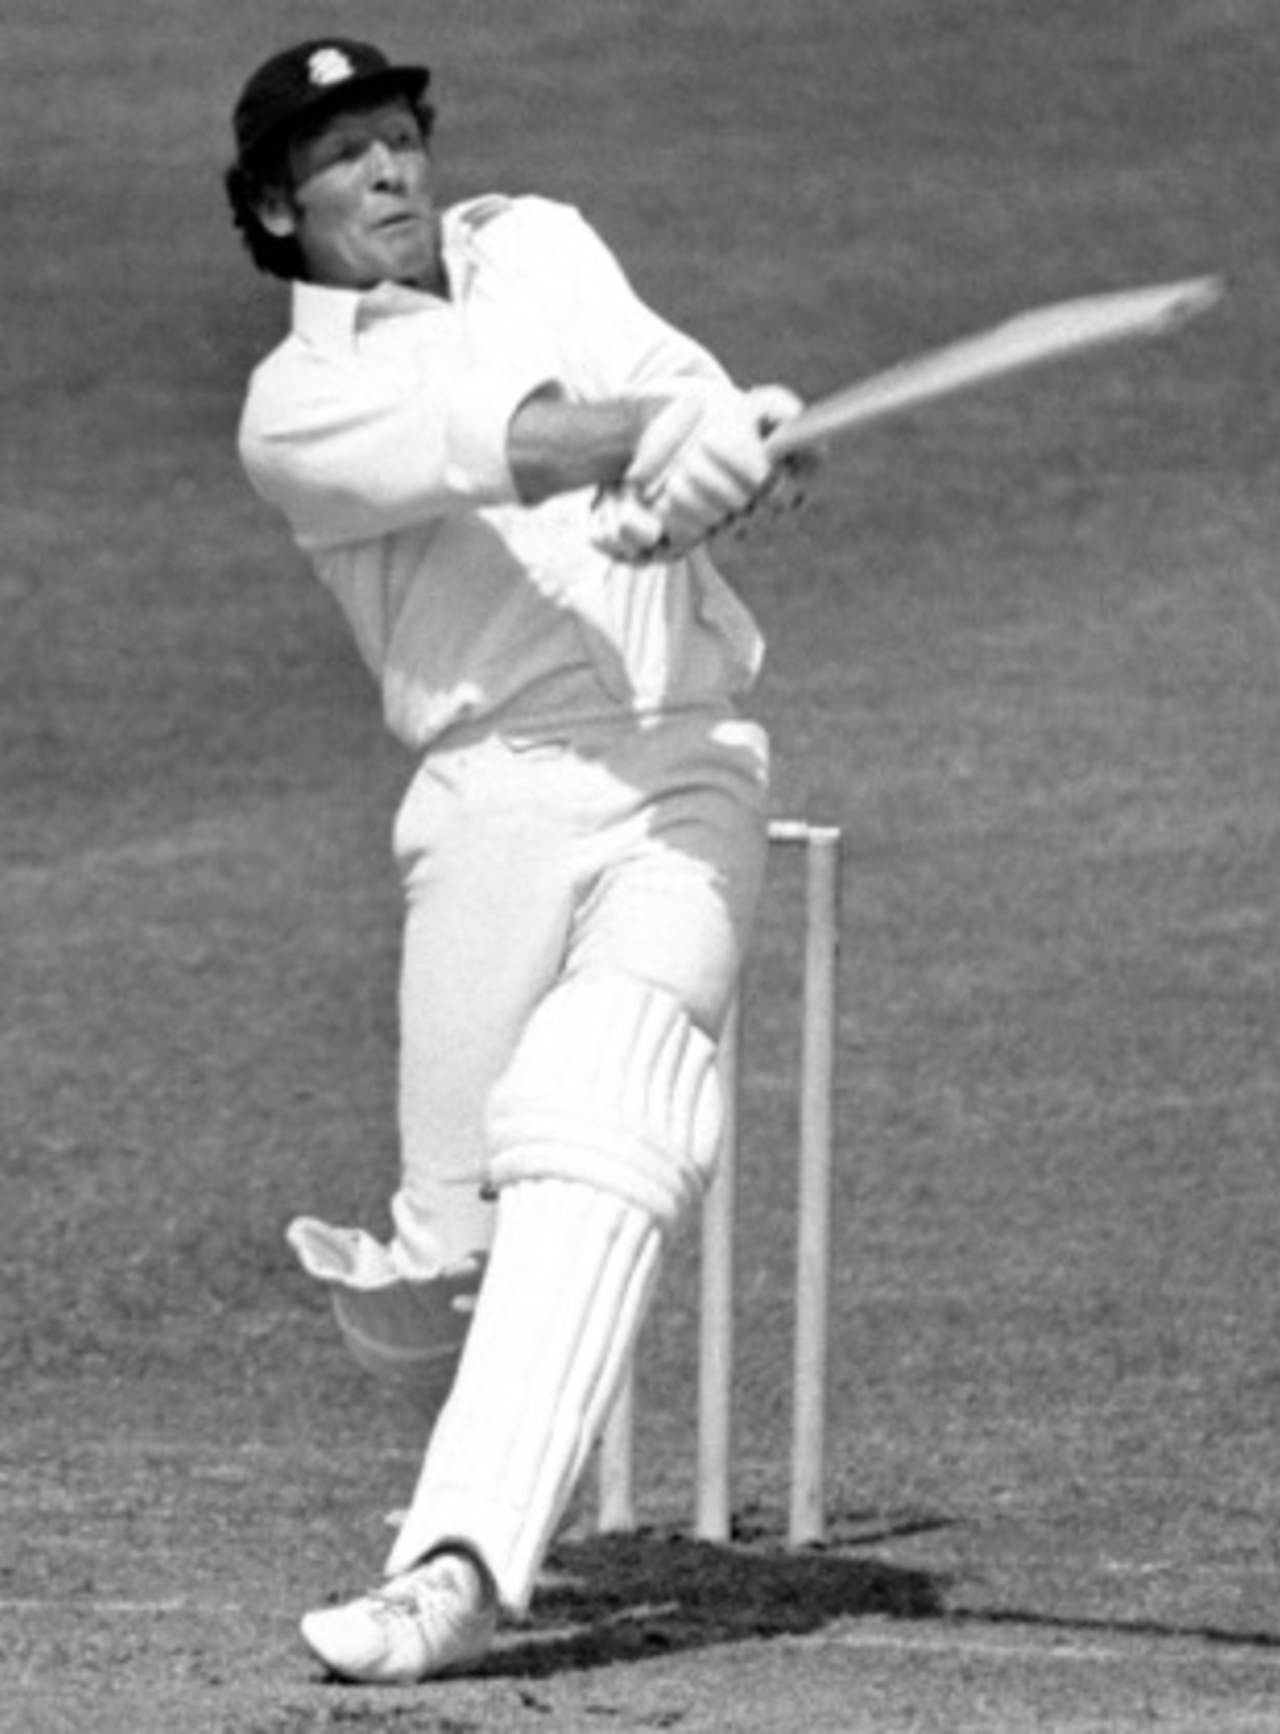 Captain Mike Denness made a 31-ball 37, England v India, World Cup, June 7, 1975